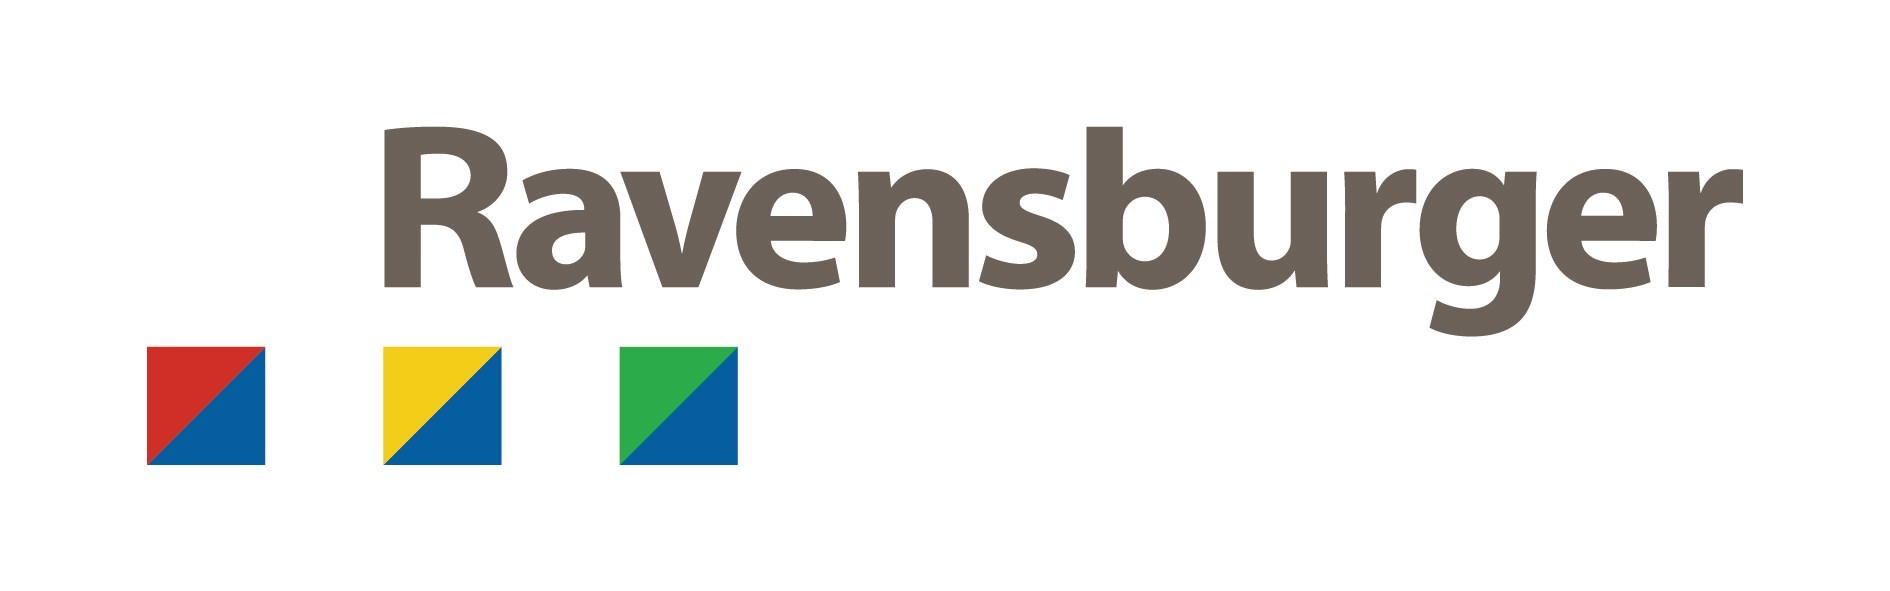 ThinkFun Joins Ravensburger Family of Brands